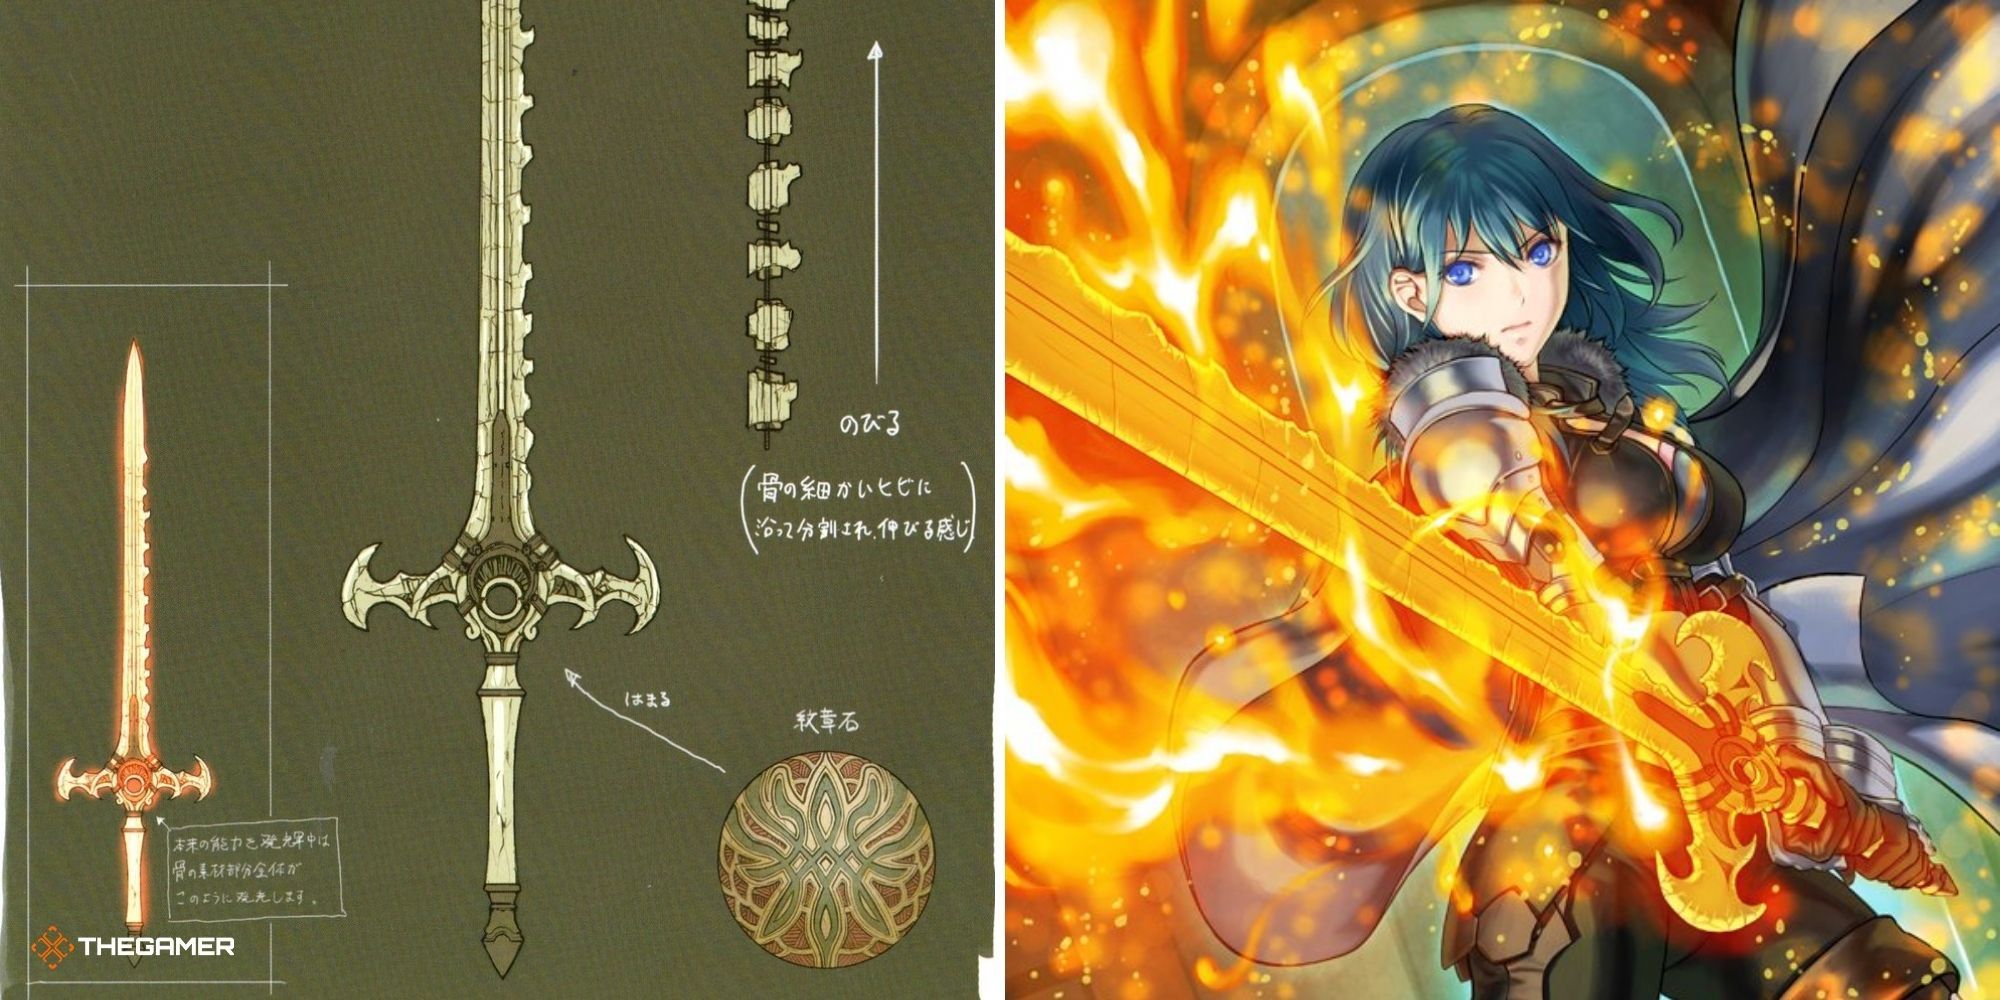 Fire Emblem Three Houses - Sword of the Creator official art on left, Female Byleth holding the relic in official art on right